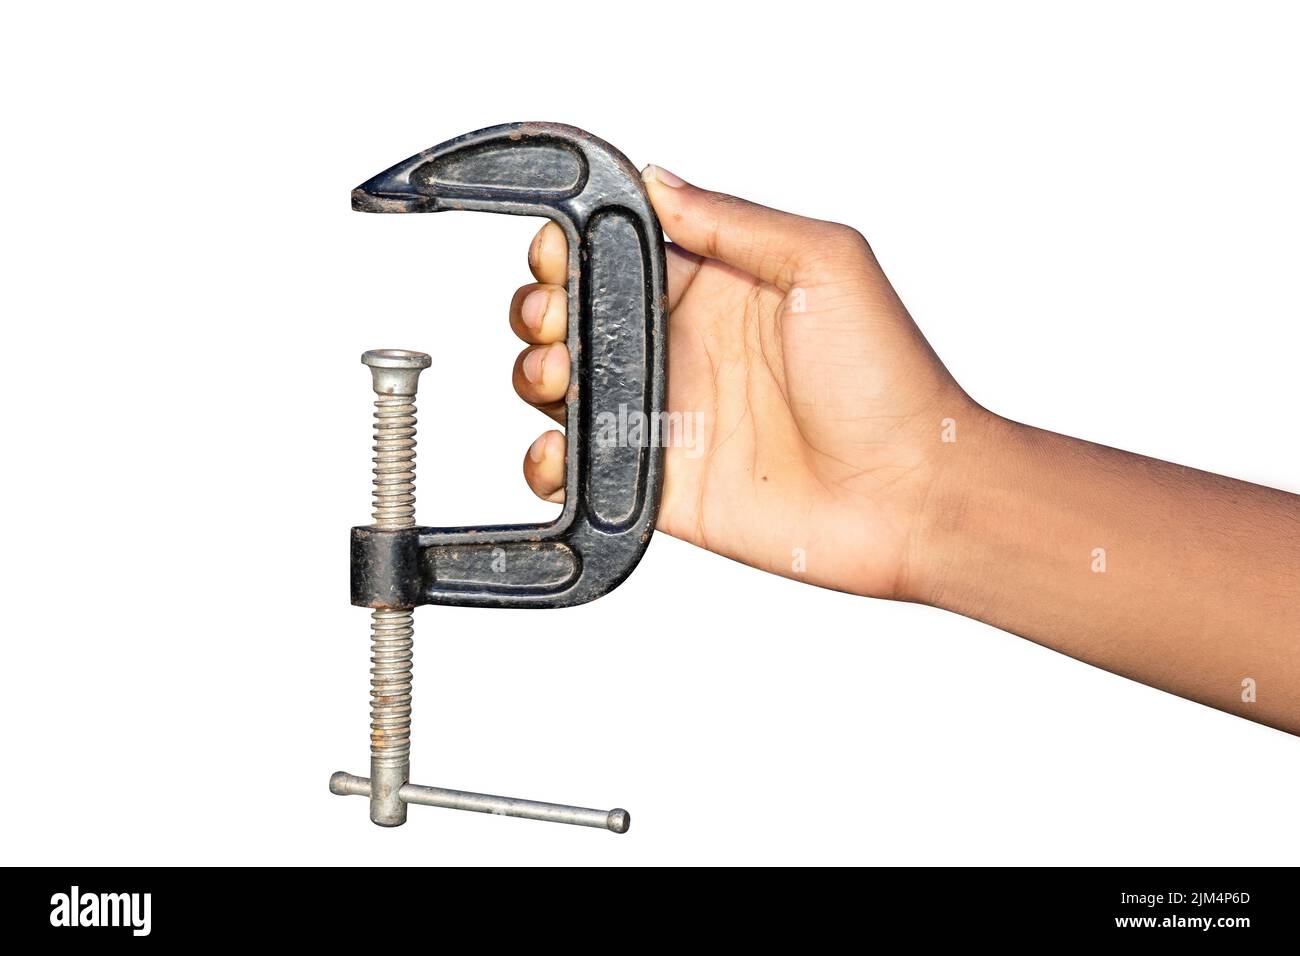 isolated male hand holding a wrench Stock Photo